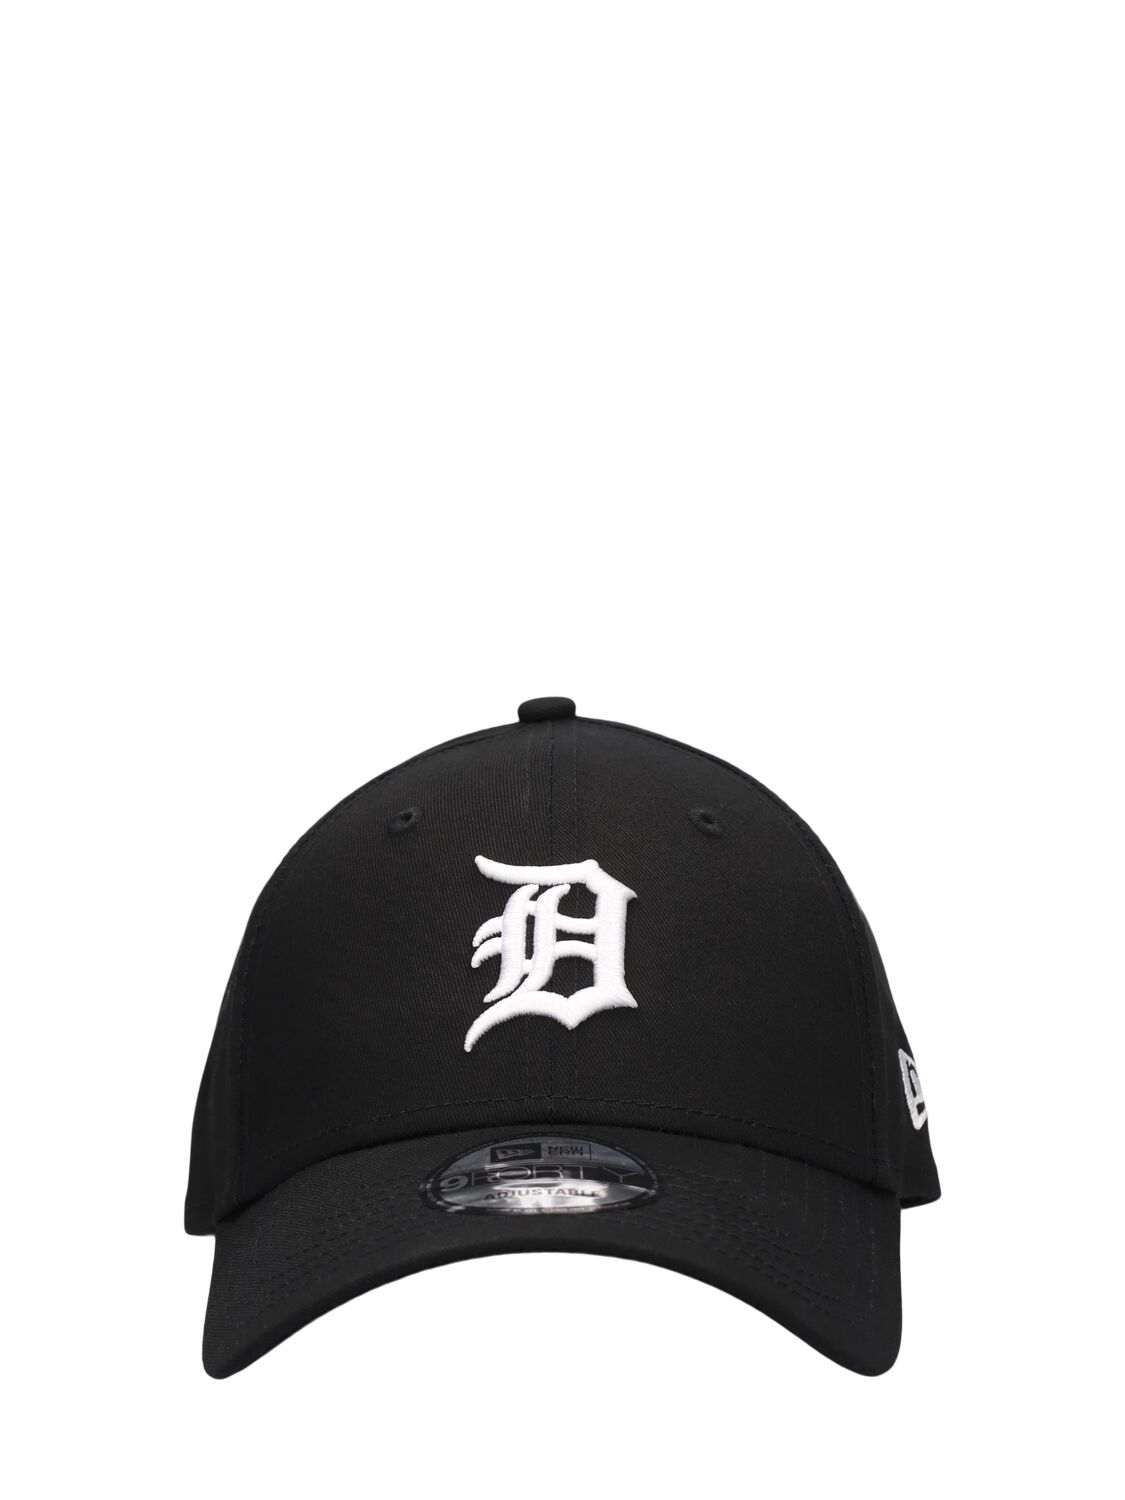 Image of Detroit Tigers 9forty Cotton Cap